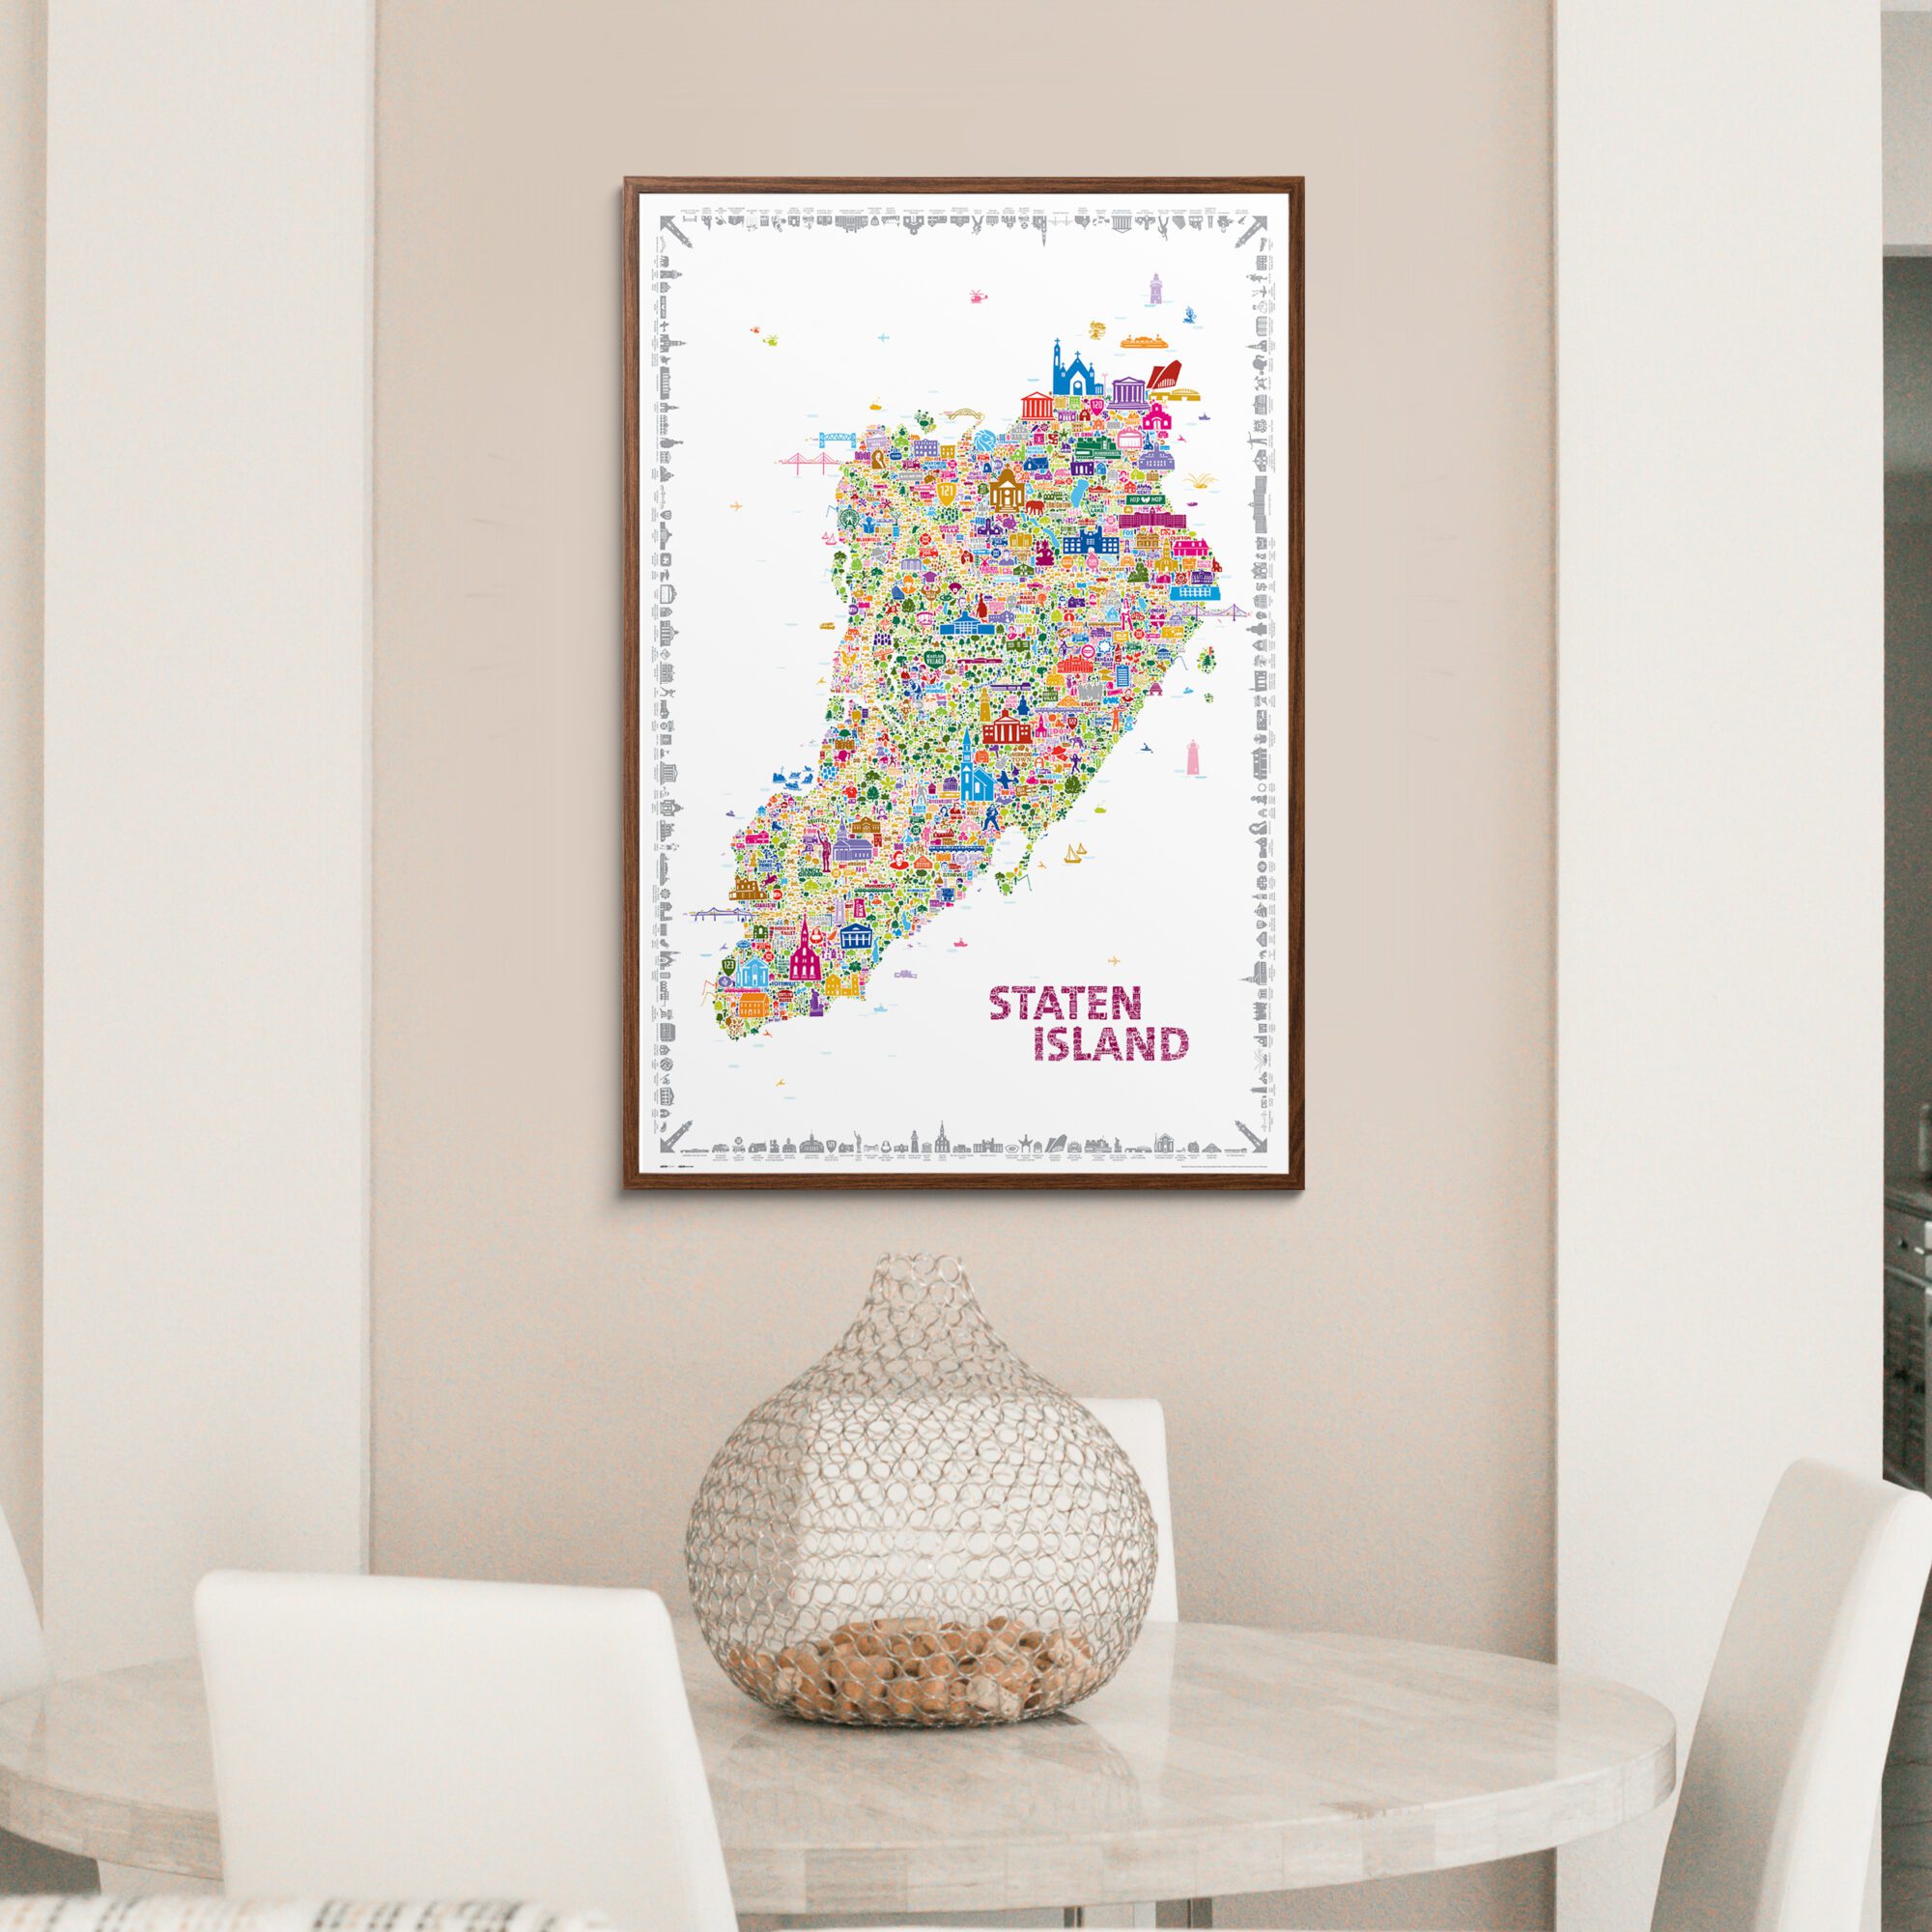 Iconic Staten Island Large Poster Artwork Home Office Walls Designer Map Wall Art Trendy Colorful Modern Trendy Vintage Decor Living Room Bedroom Kitchen Farmhouse NYC Borough Cool Aesthetic Unique Style Perfect Gift Travel Souvenir Big Paper Print